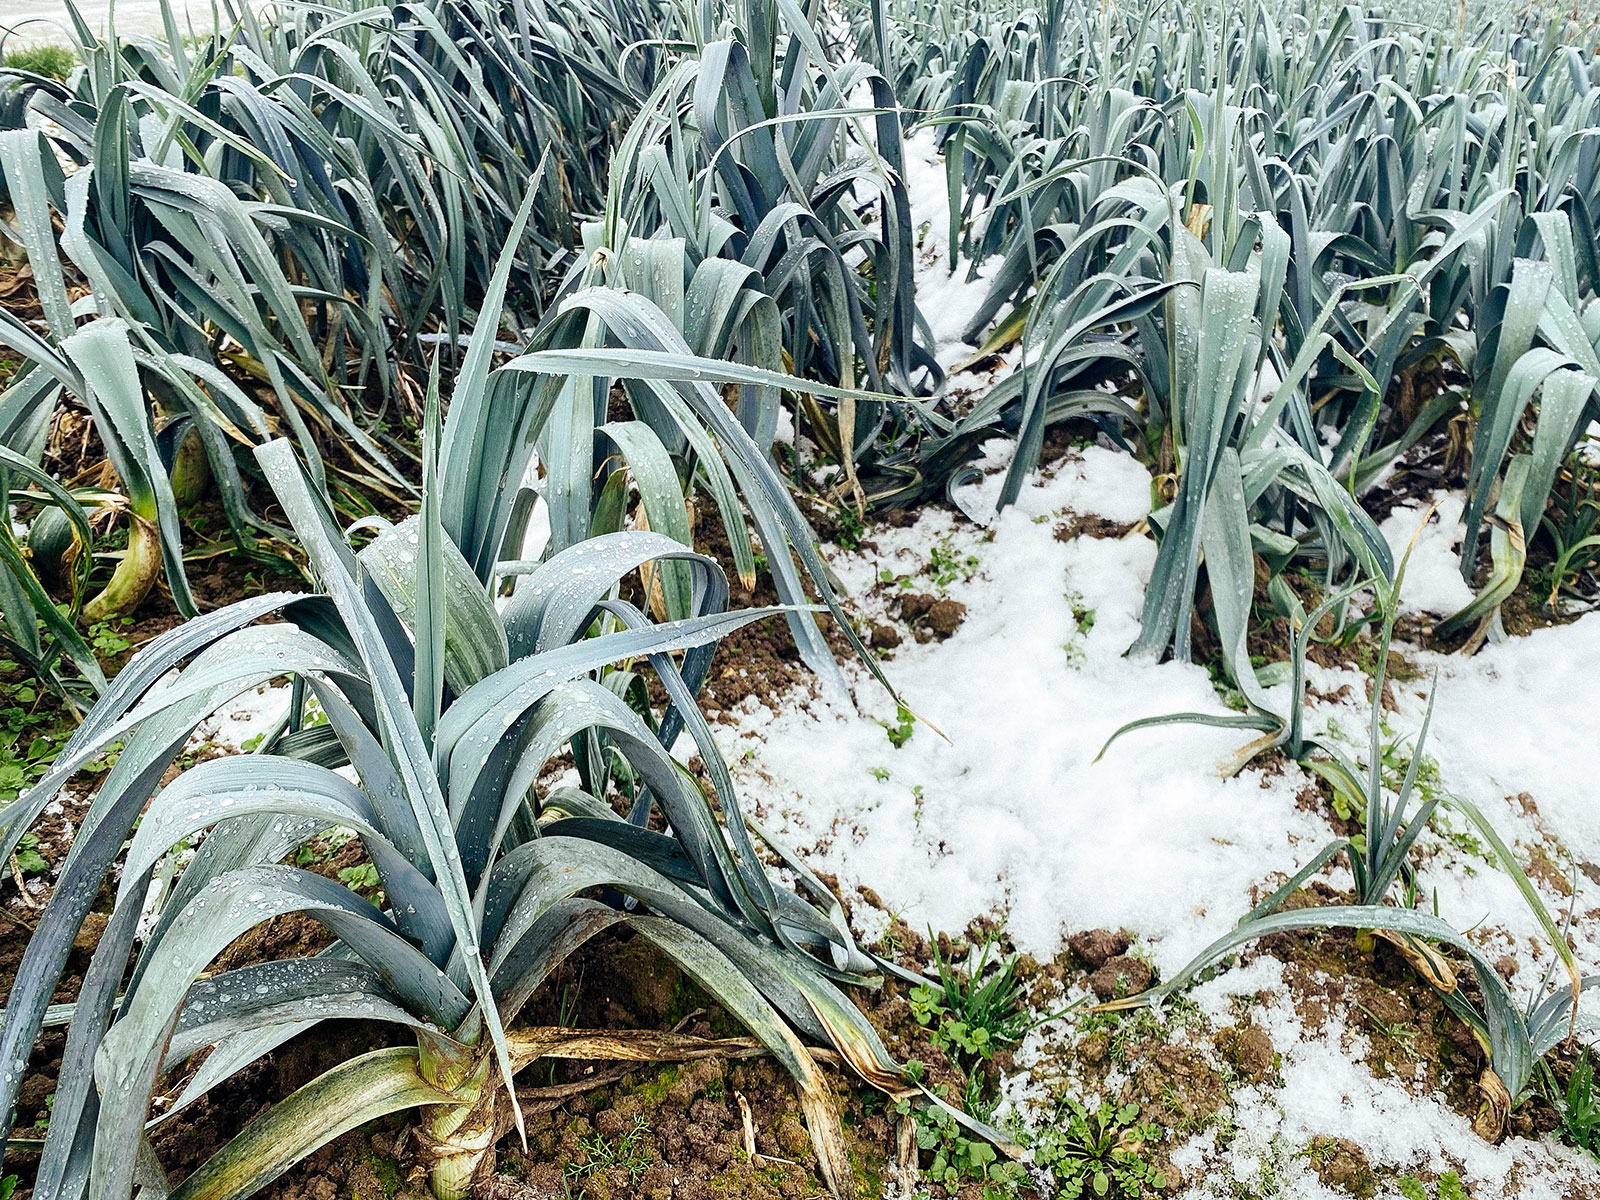 Freeze-resistant leek plants growing in winter with snow on the ground